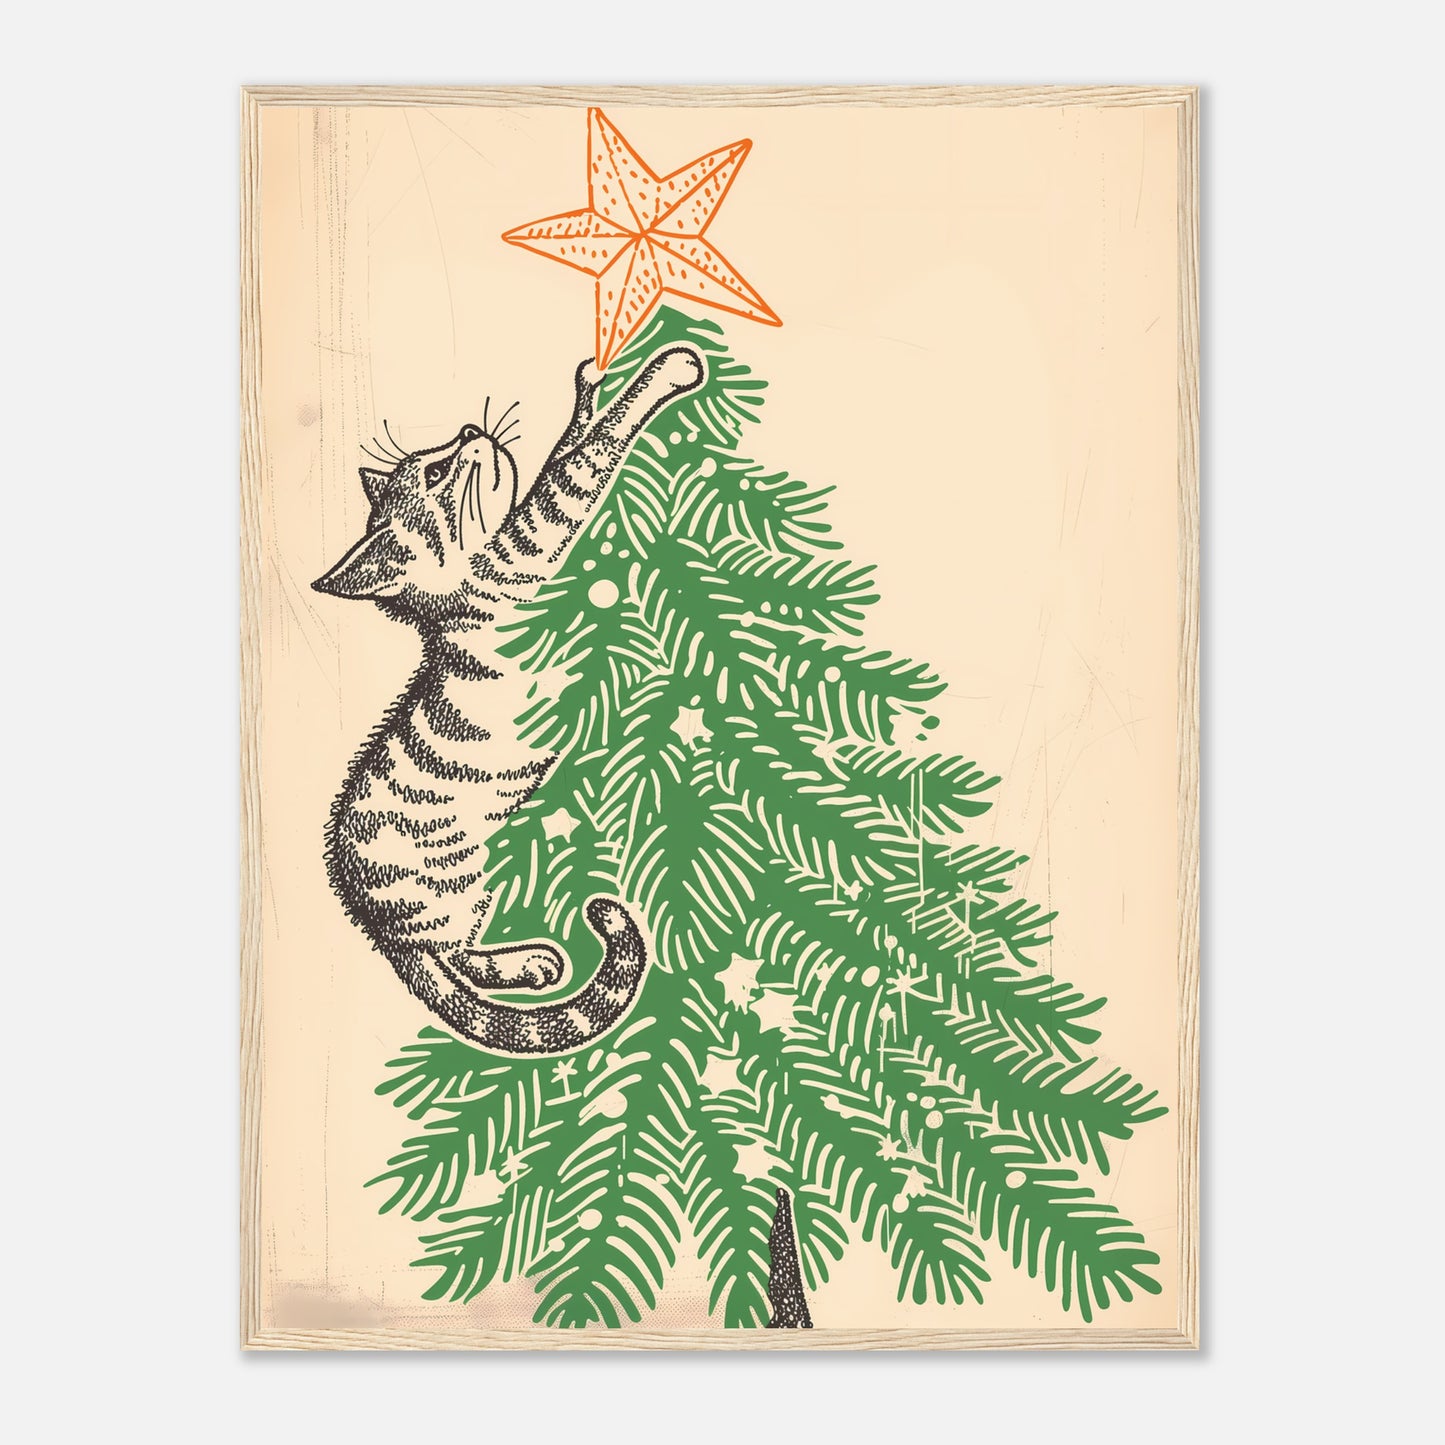 Illustration of a cat reaching up to place a star on top of a Christmas tree.